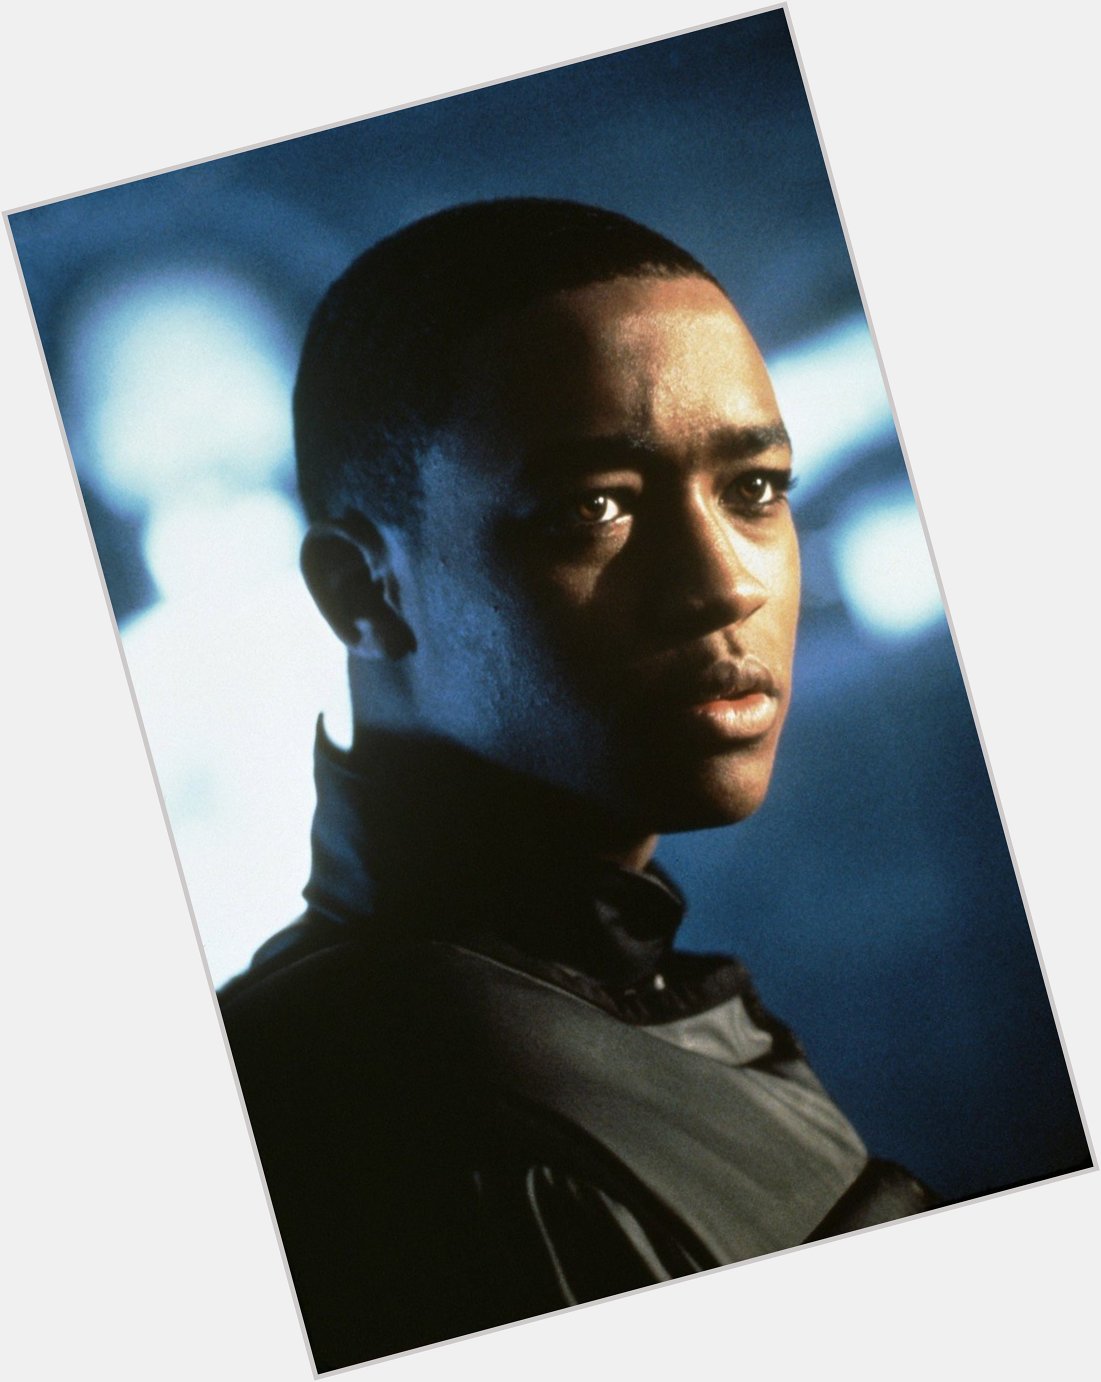 Happy Birthday, Lee Thompson Young! 

I miss you! 